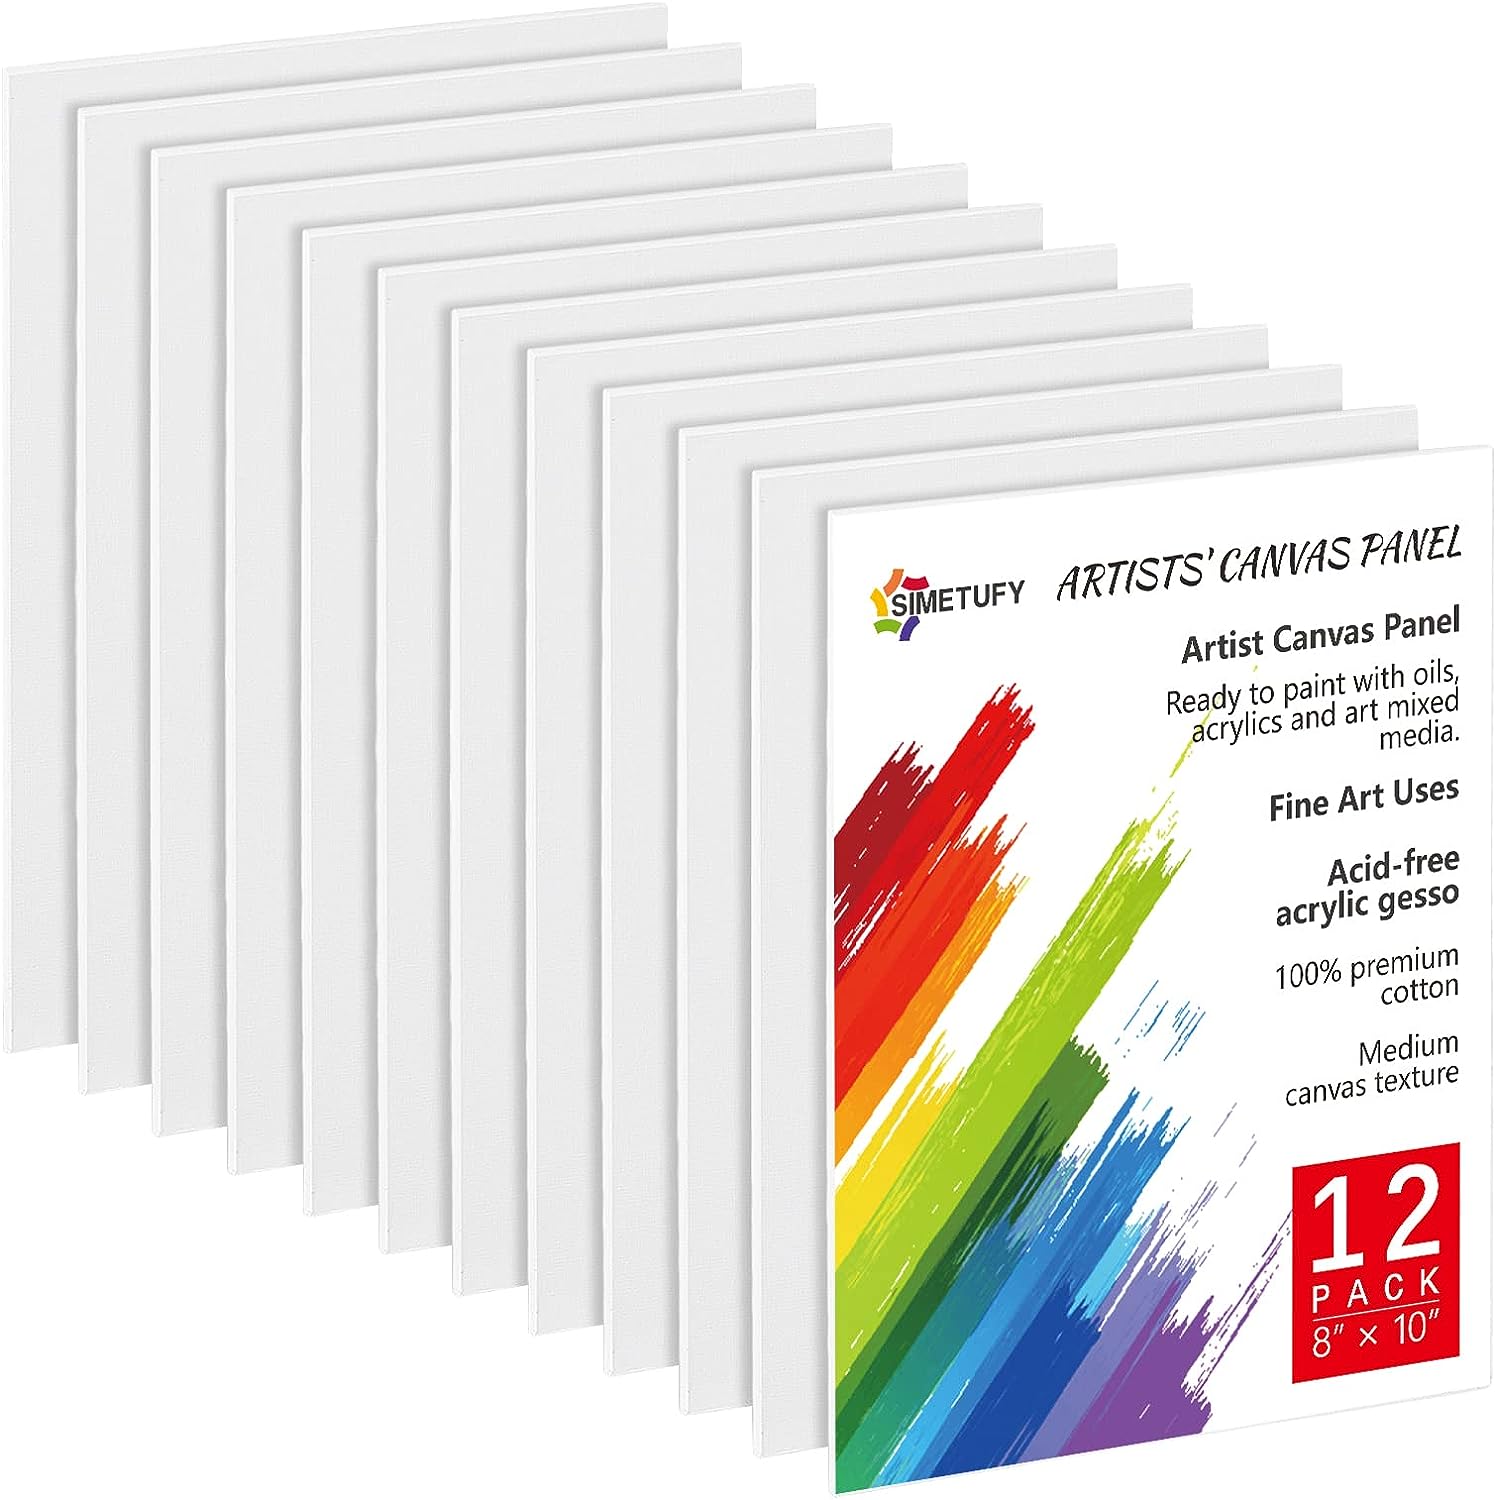  Shuttle Art Painting Canvas Panels, 36 Pack, 5x7, 8x10in (18 of  Each), 100% Cotton, Primed White Canvas Boards for Painting, Blank Canvases  for Kids, Adults & Artists for Acrylic and Oil Painting